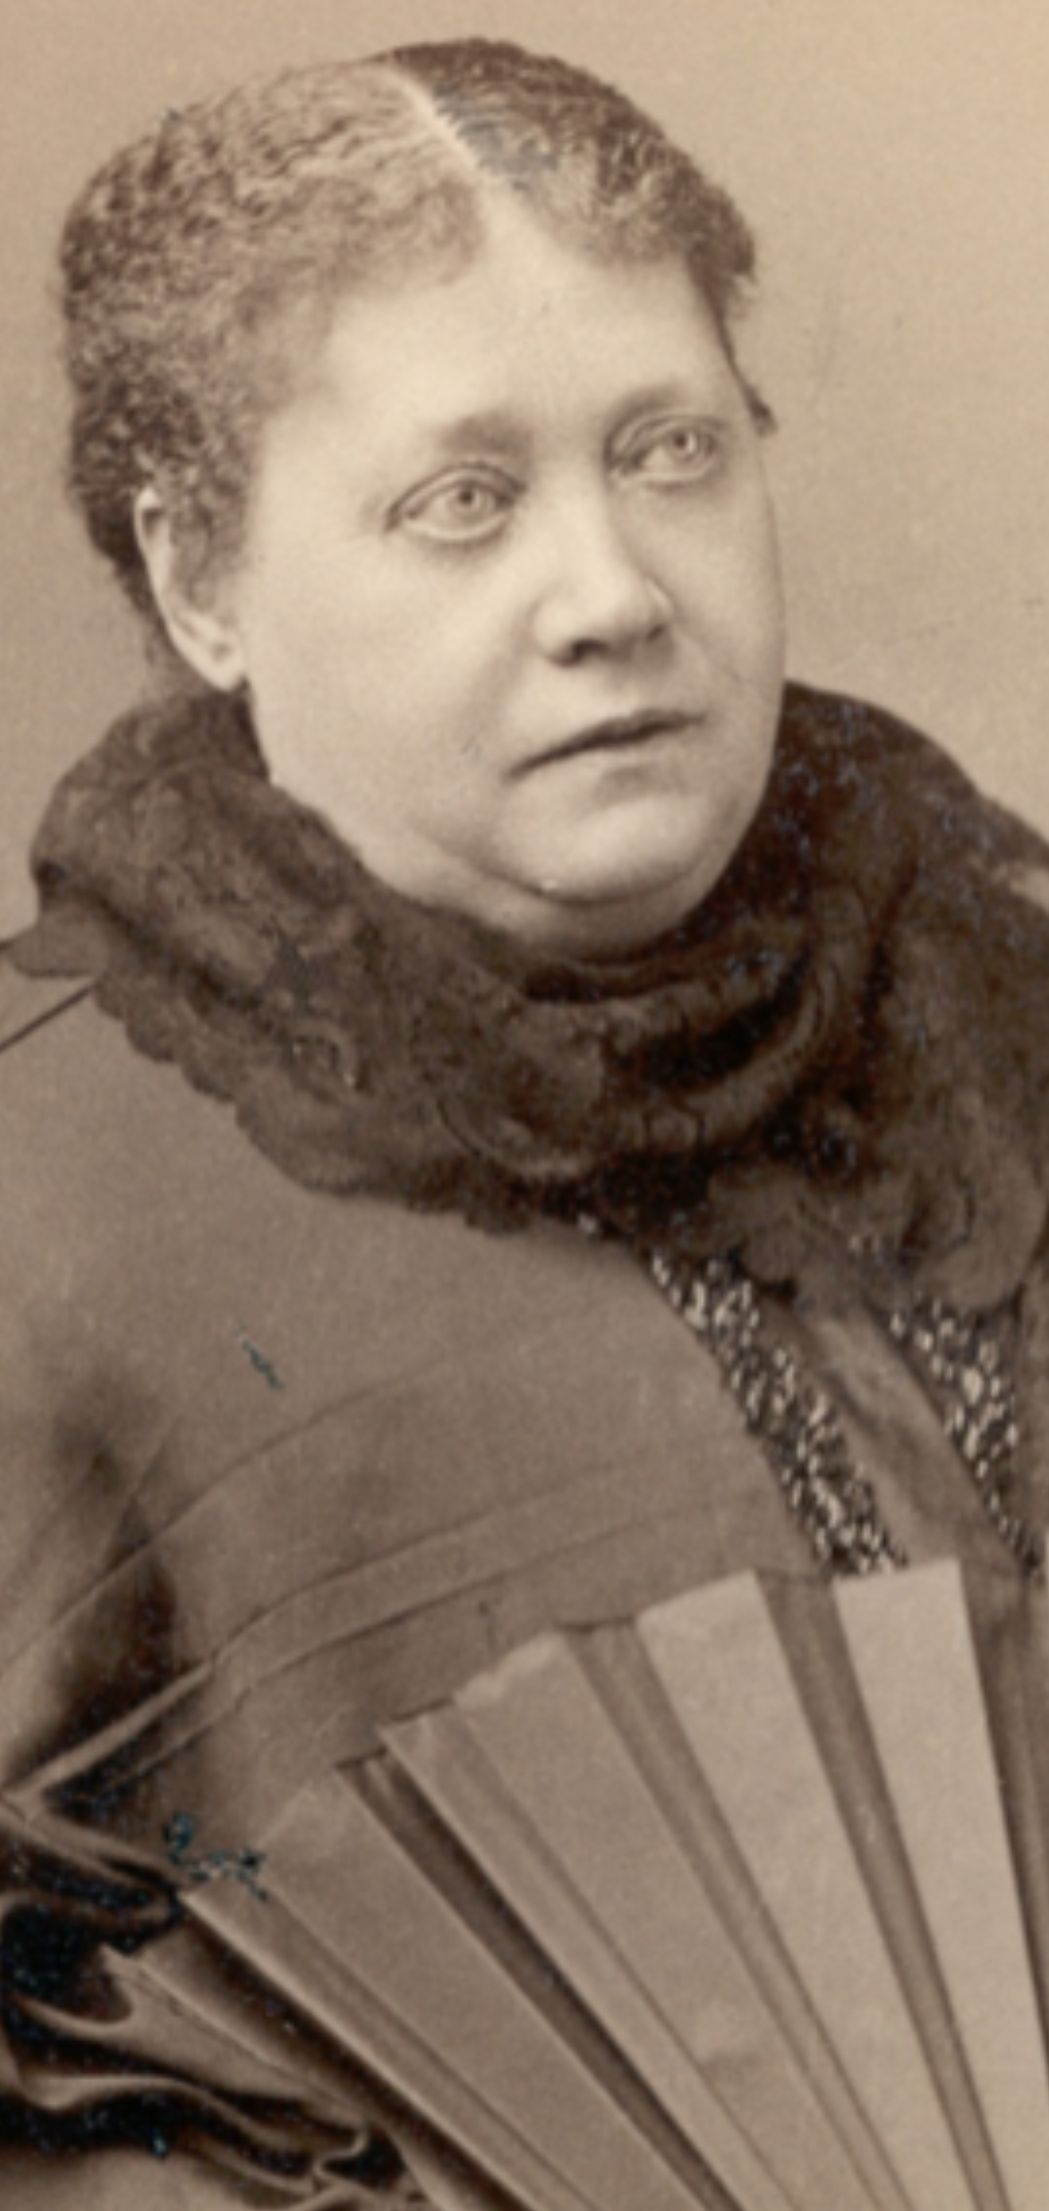 Click here to see more photos of H.P. Blavatsky